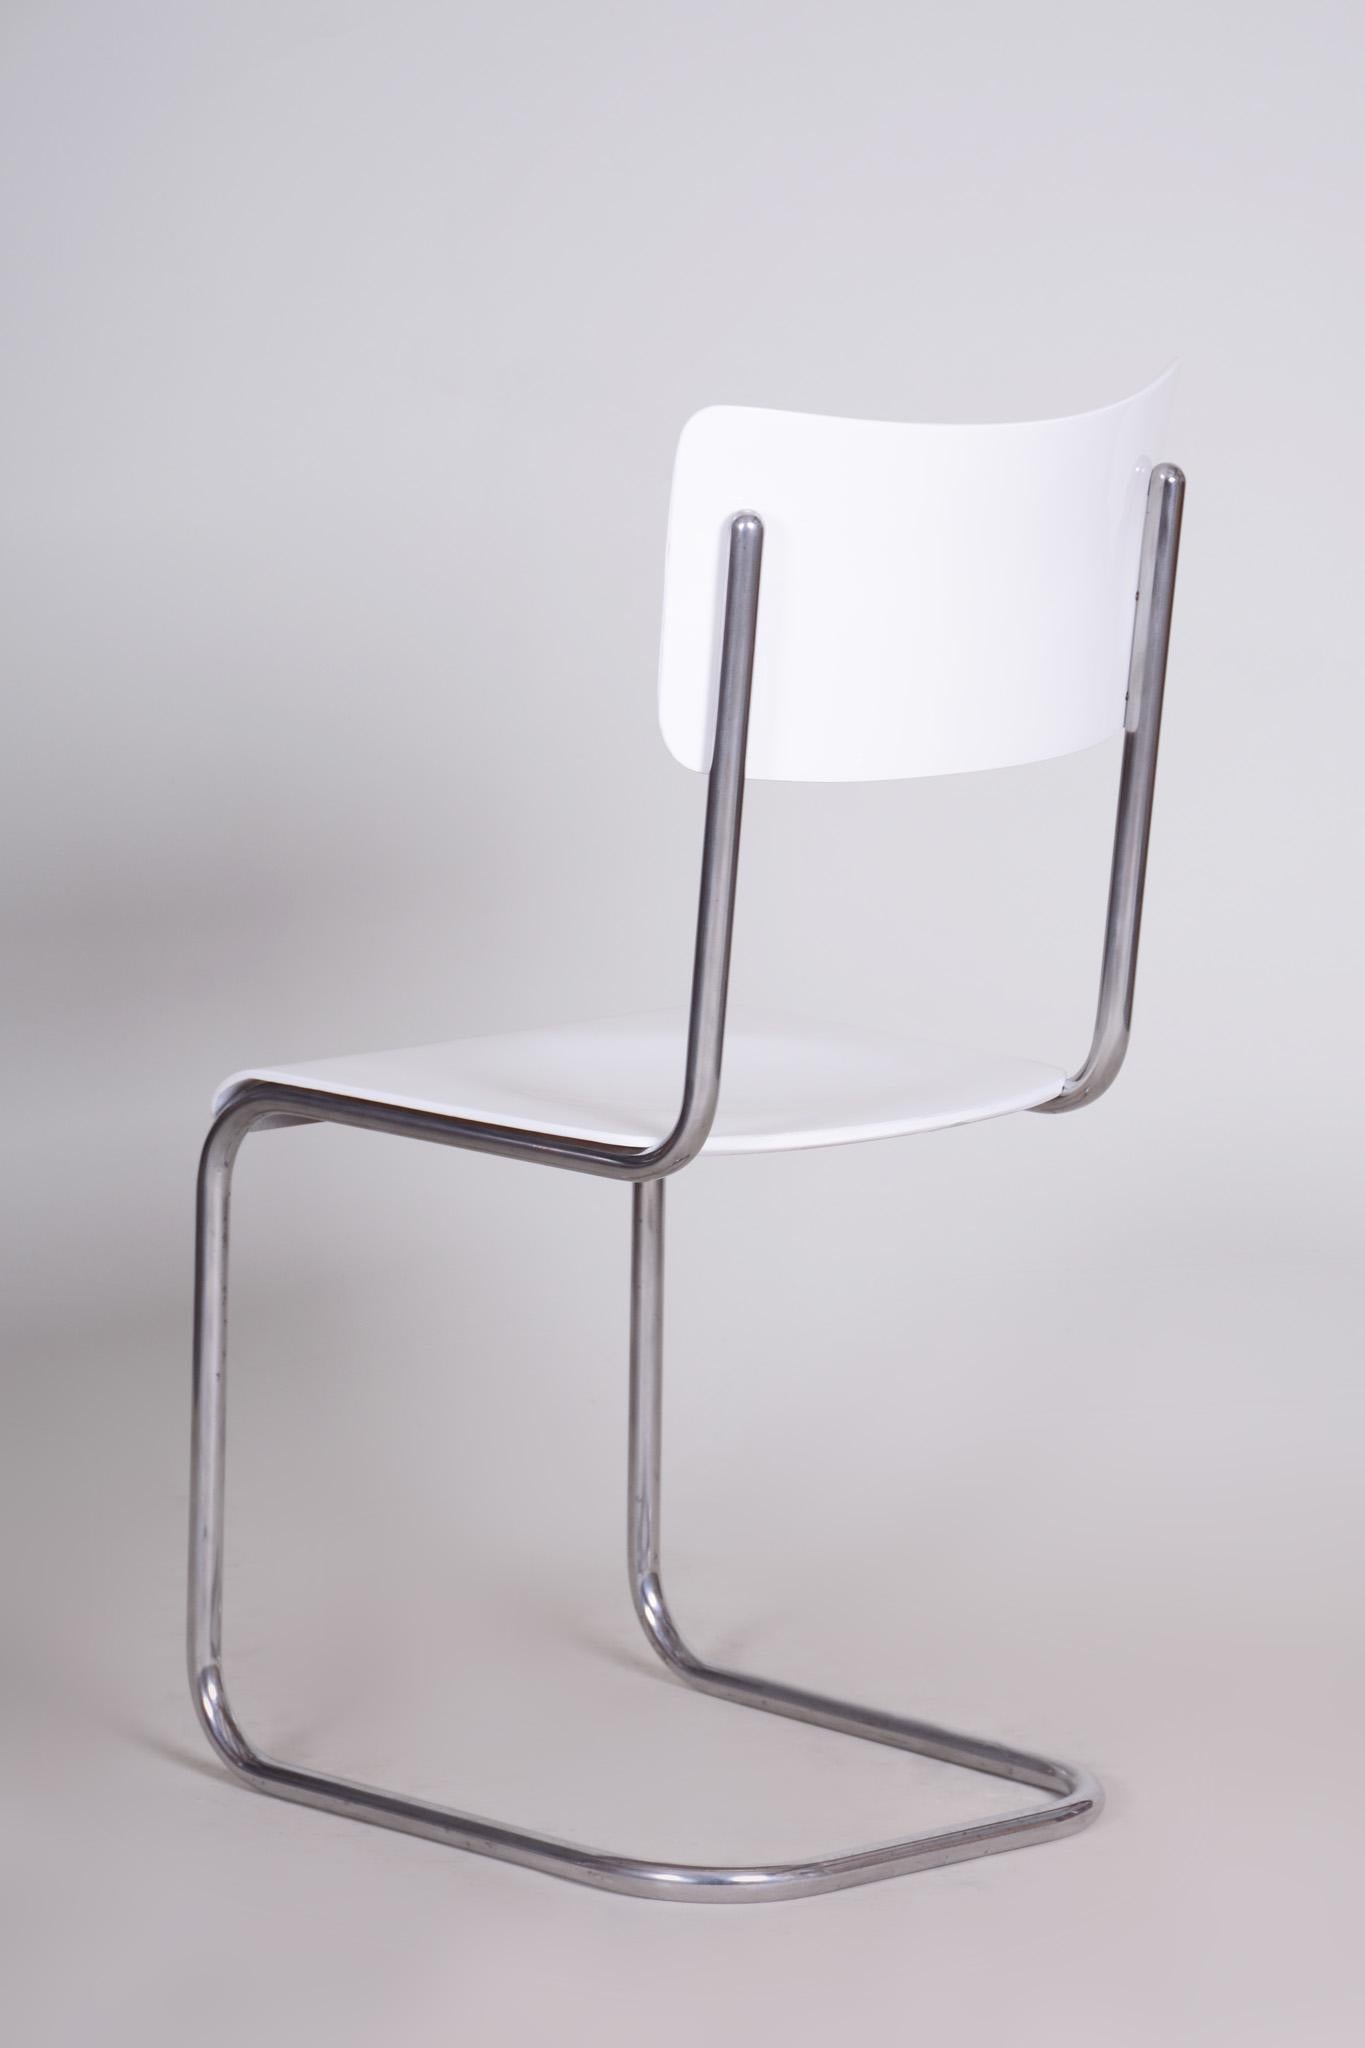 Restored White Vintage Bauhaus Chair Manufactured by Vichr a Spol, 1930-1939 In Good Condition For Sale In Horomerice, CZ